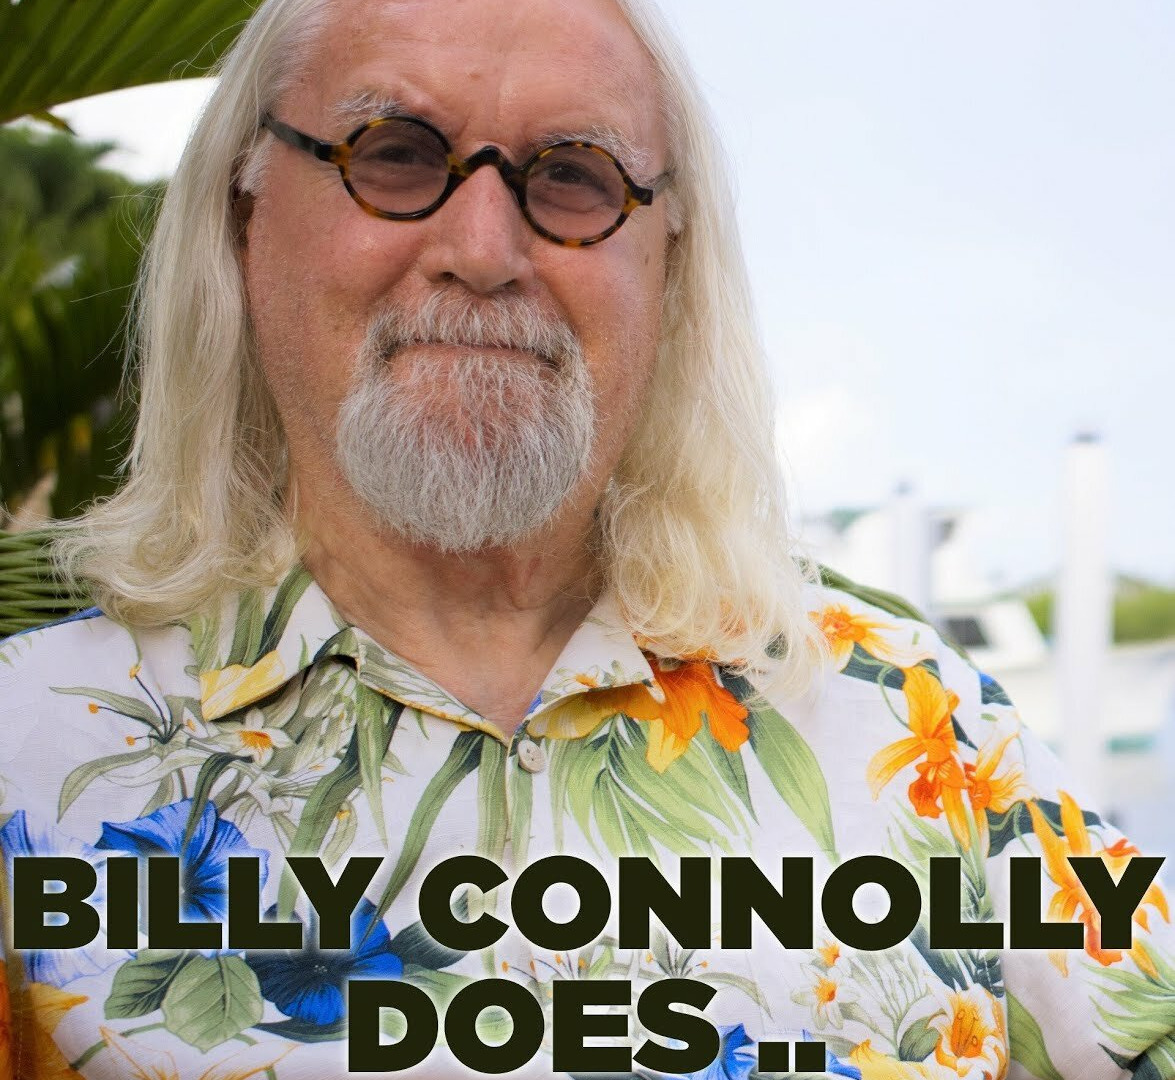 Show Billy Connolly Does…